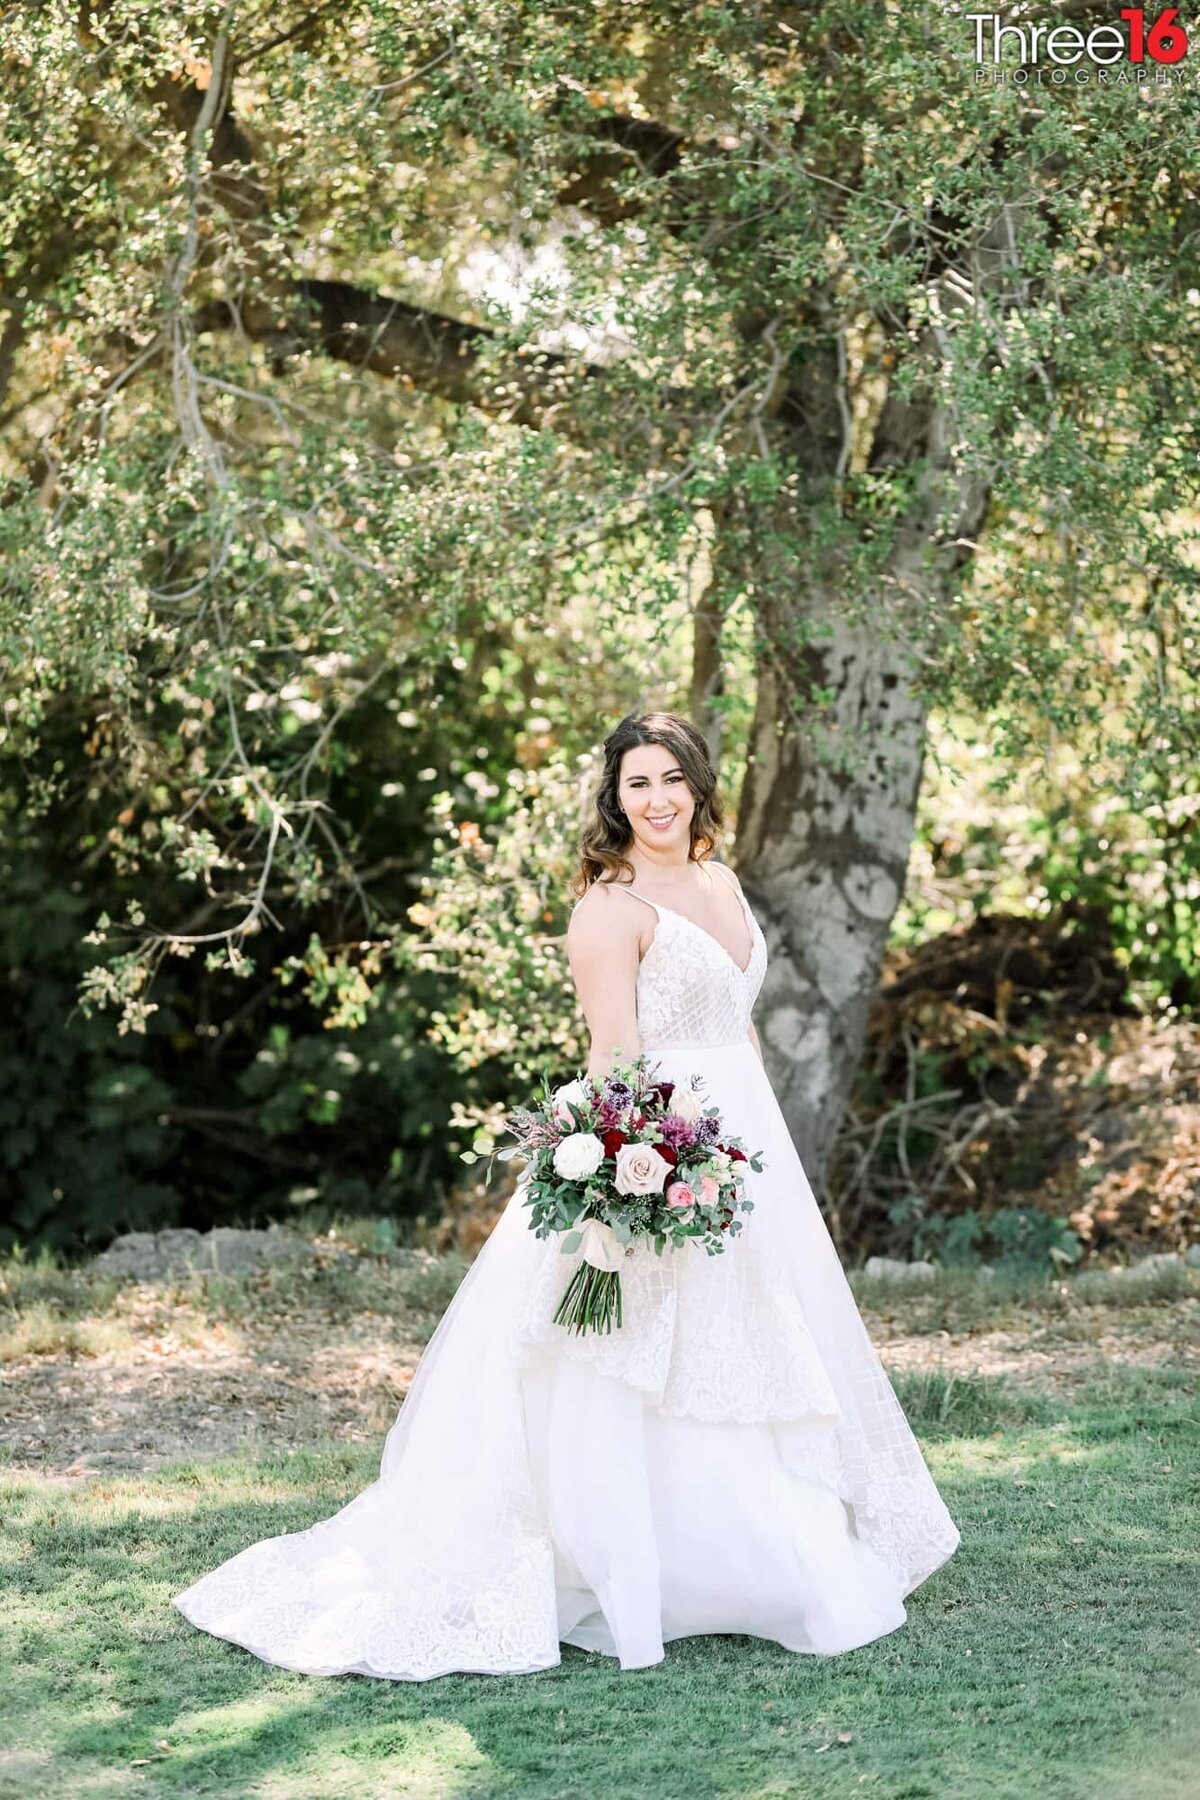 Bride poses with her bouquet under a very large tree